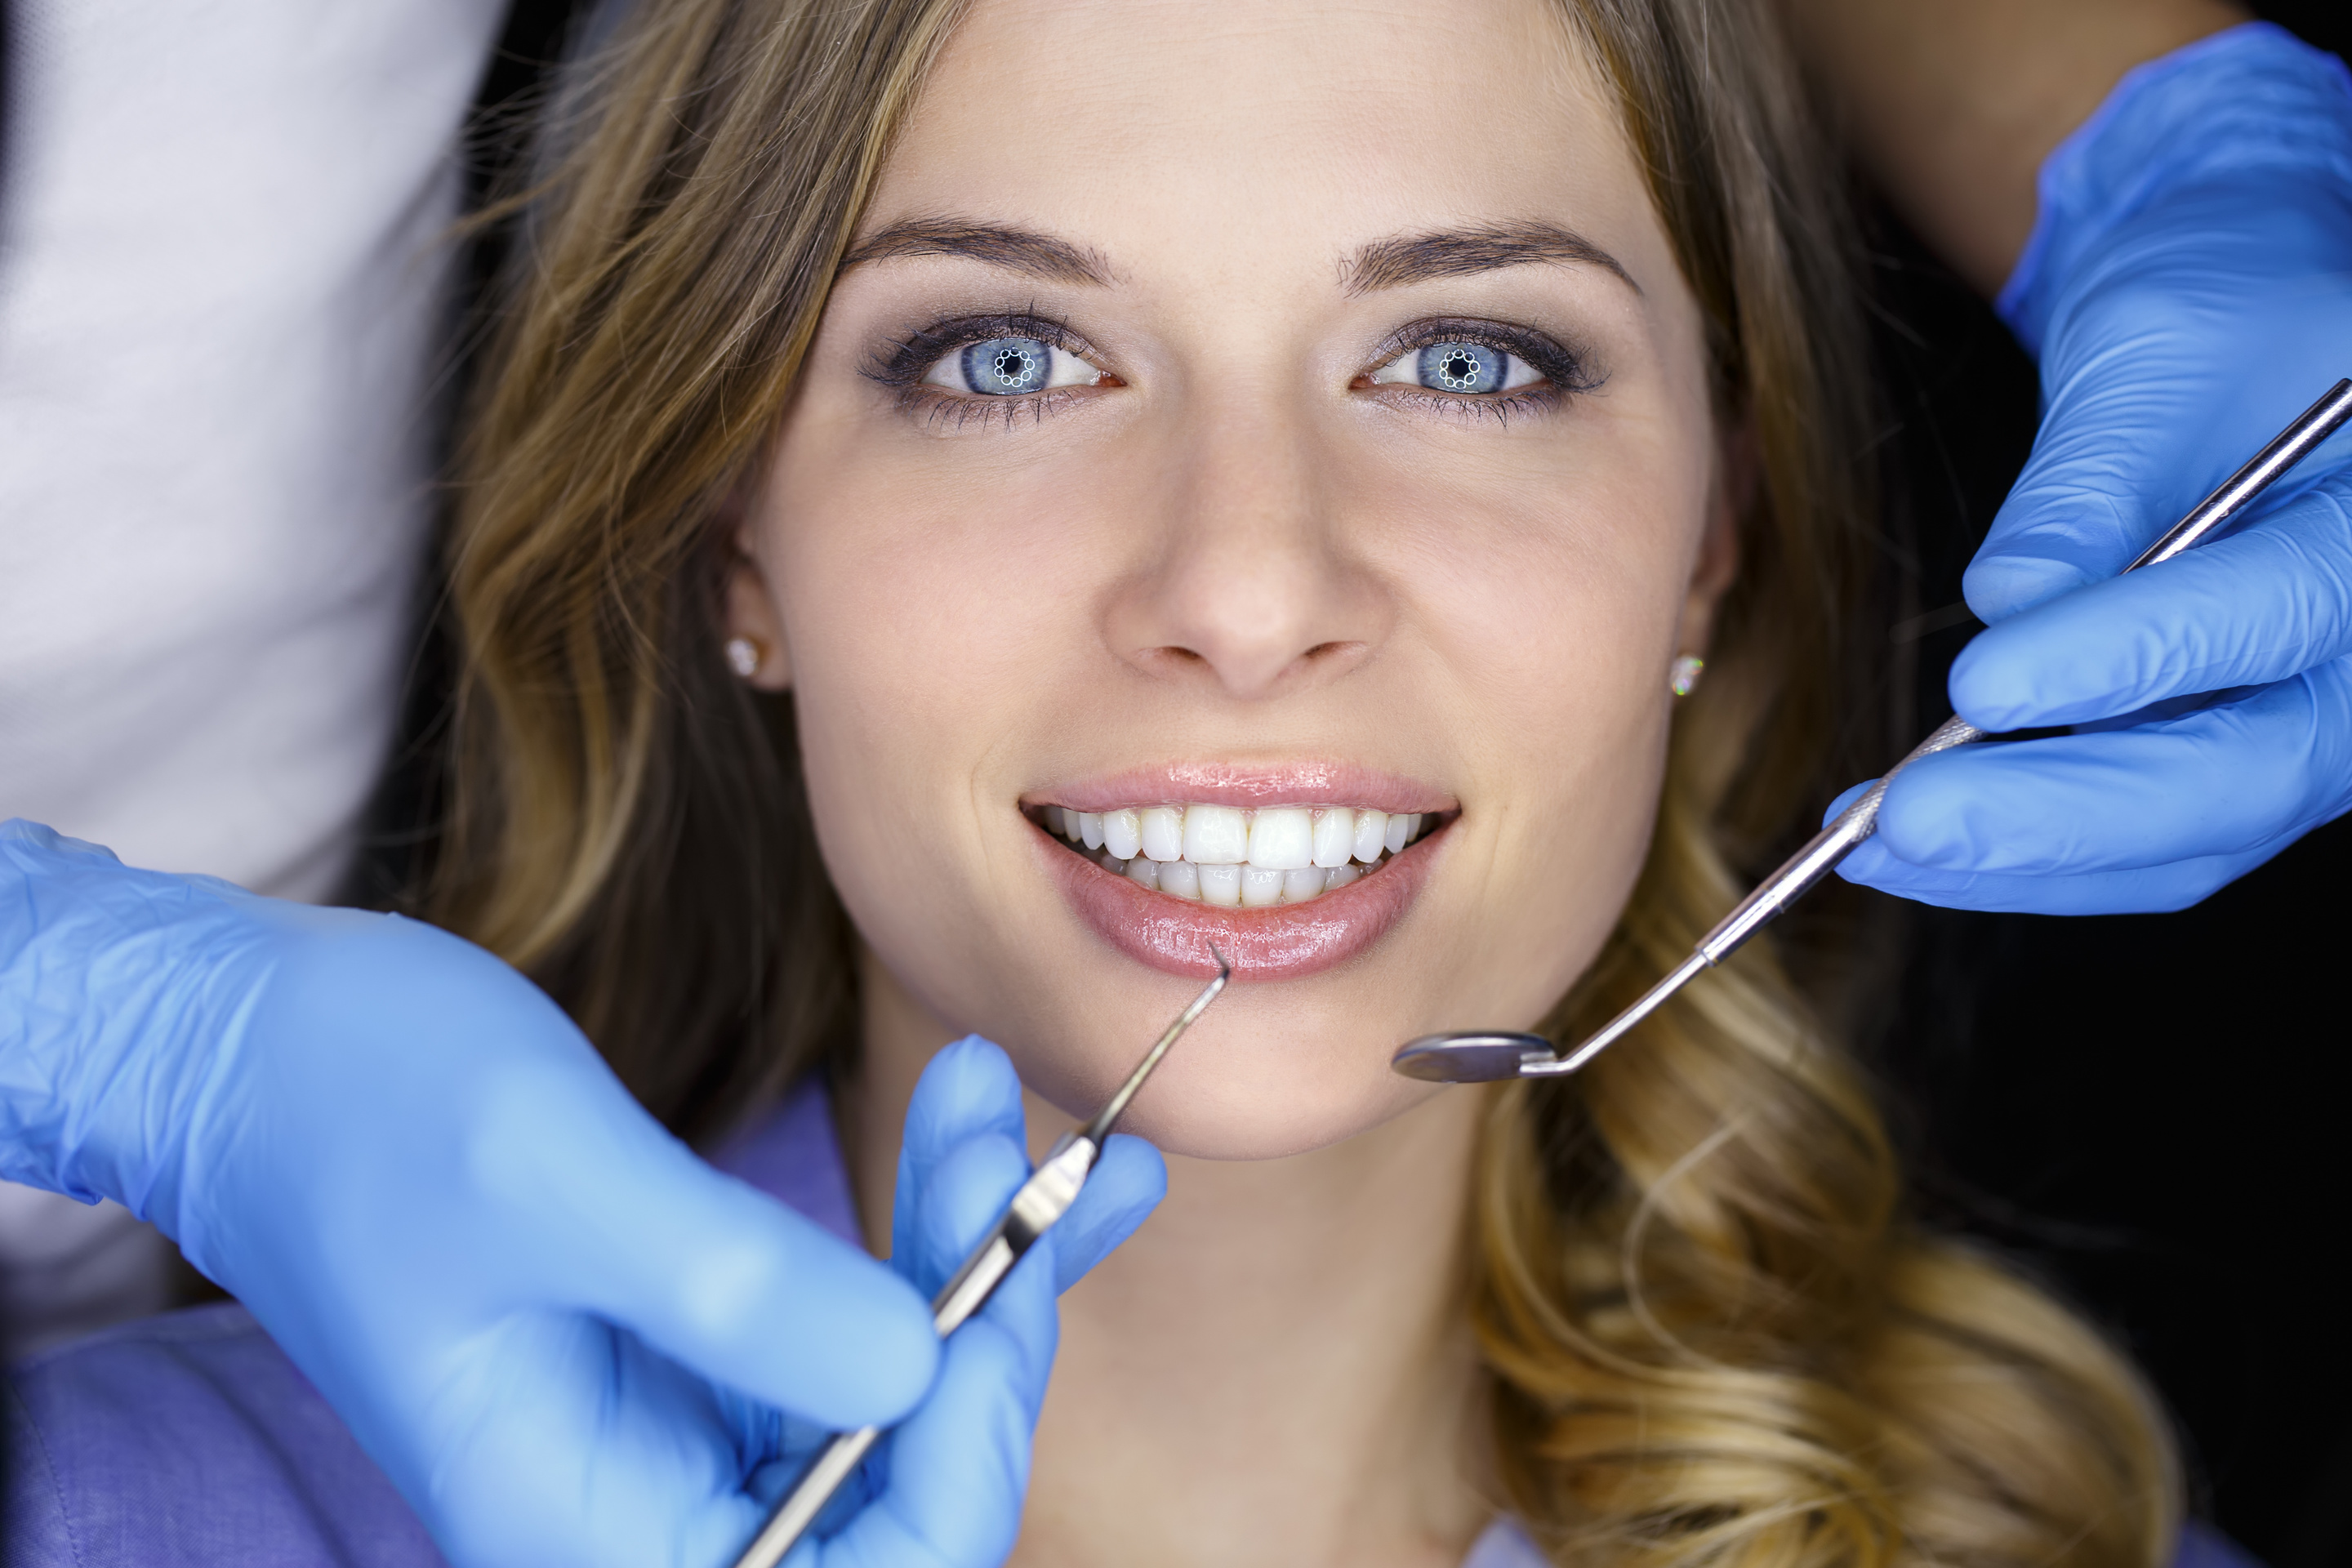 Where can I find a San Mateo dental office?